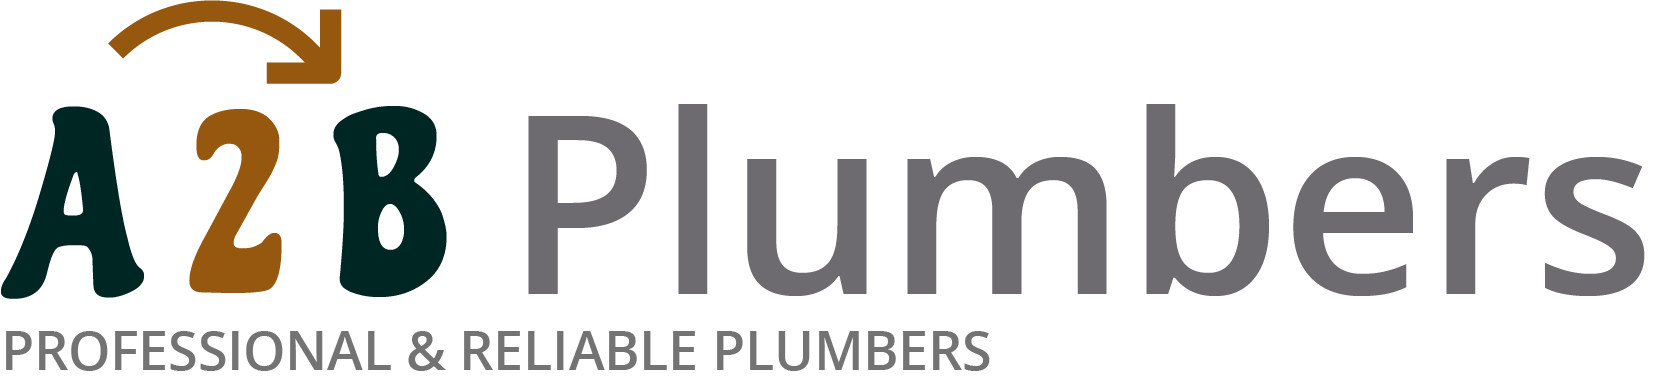 If you need a boiler installed, a radiator repaired or a leaking tap fixed, call us now - we provide services for properties in Purley and the local area.